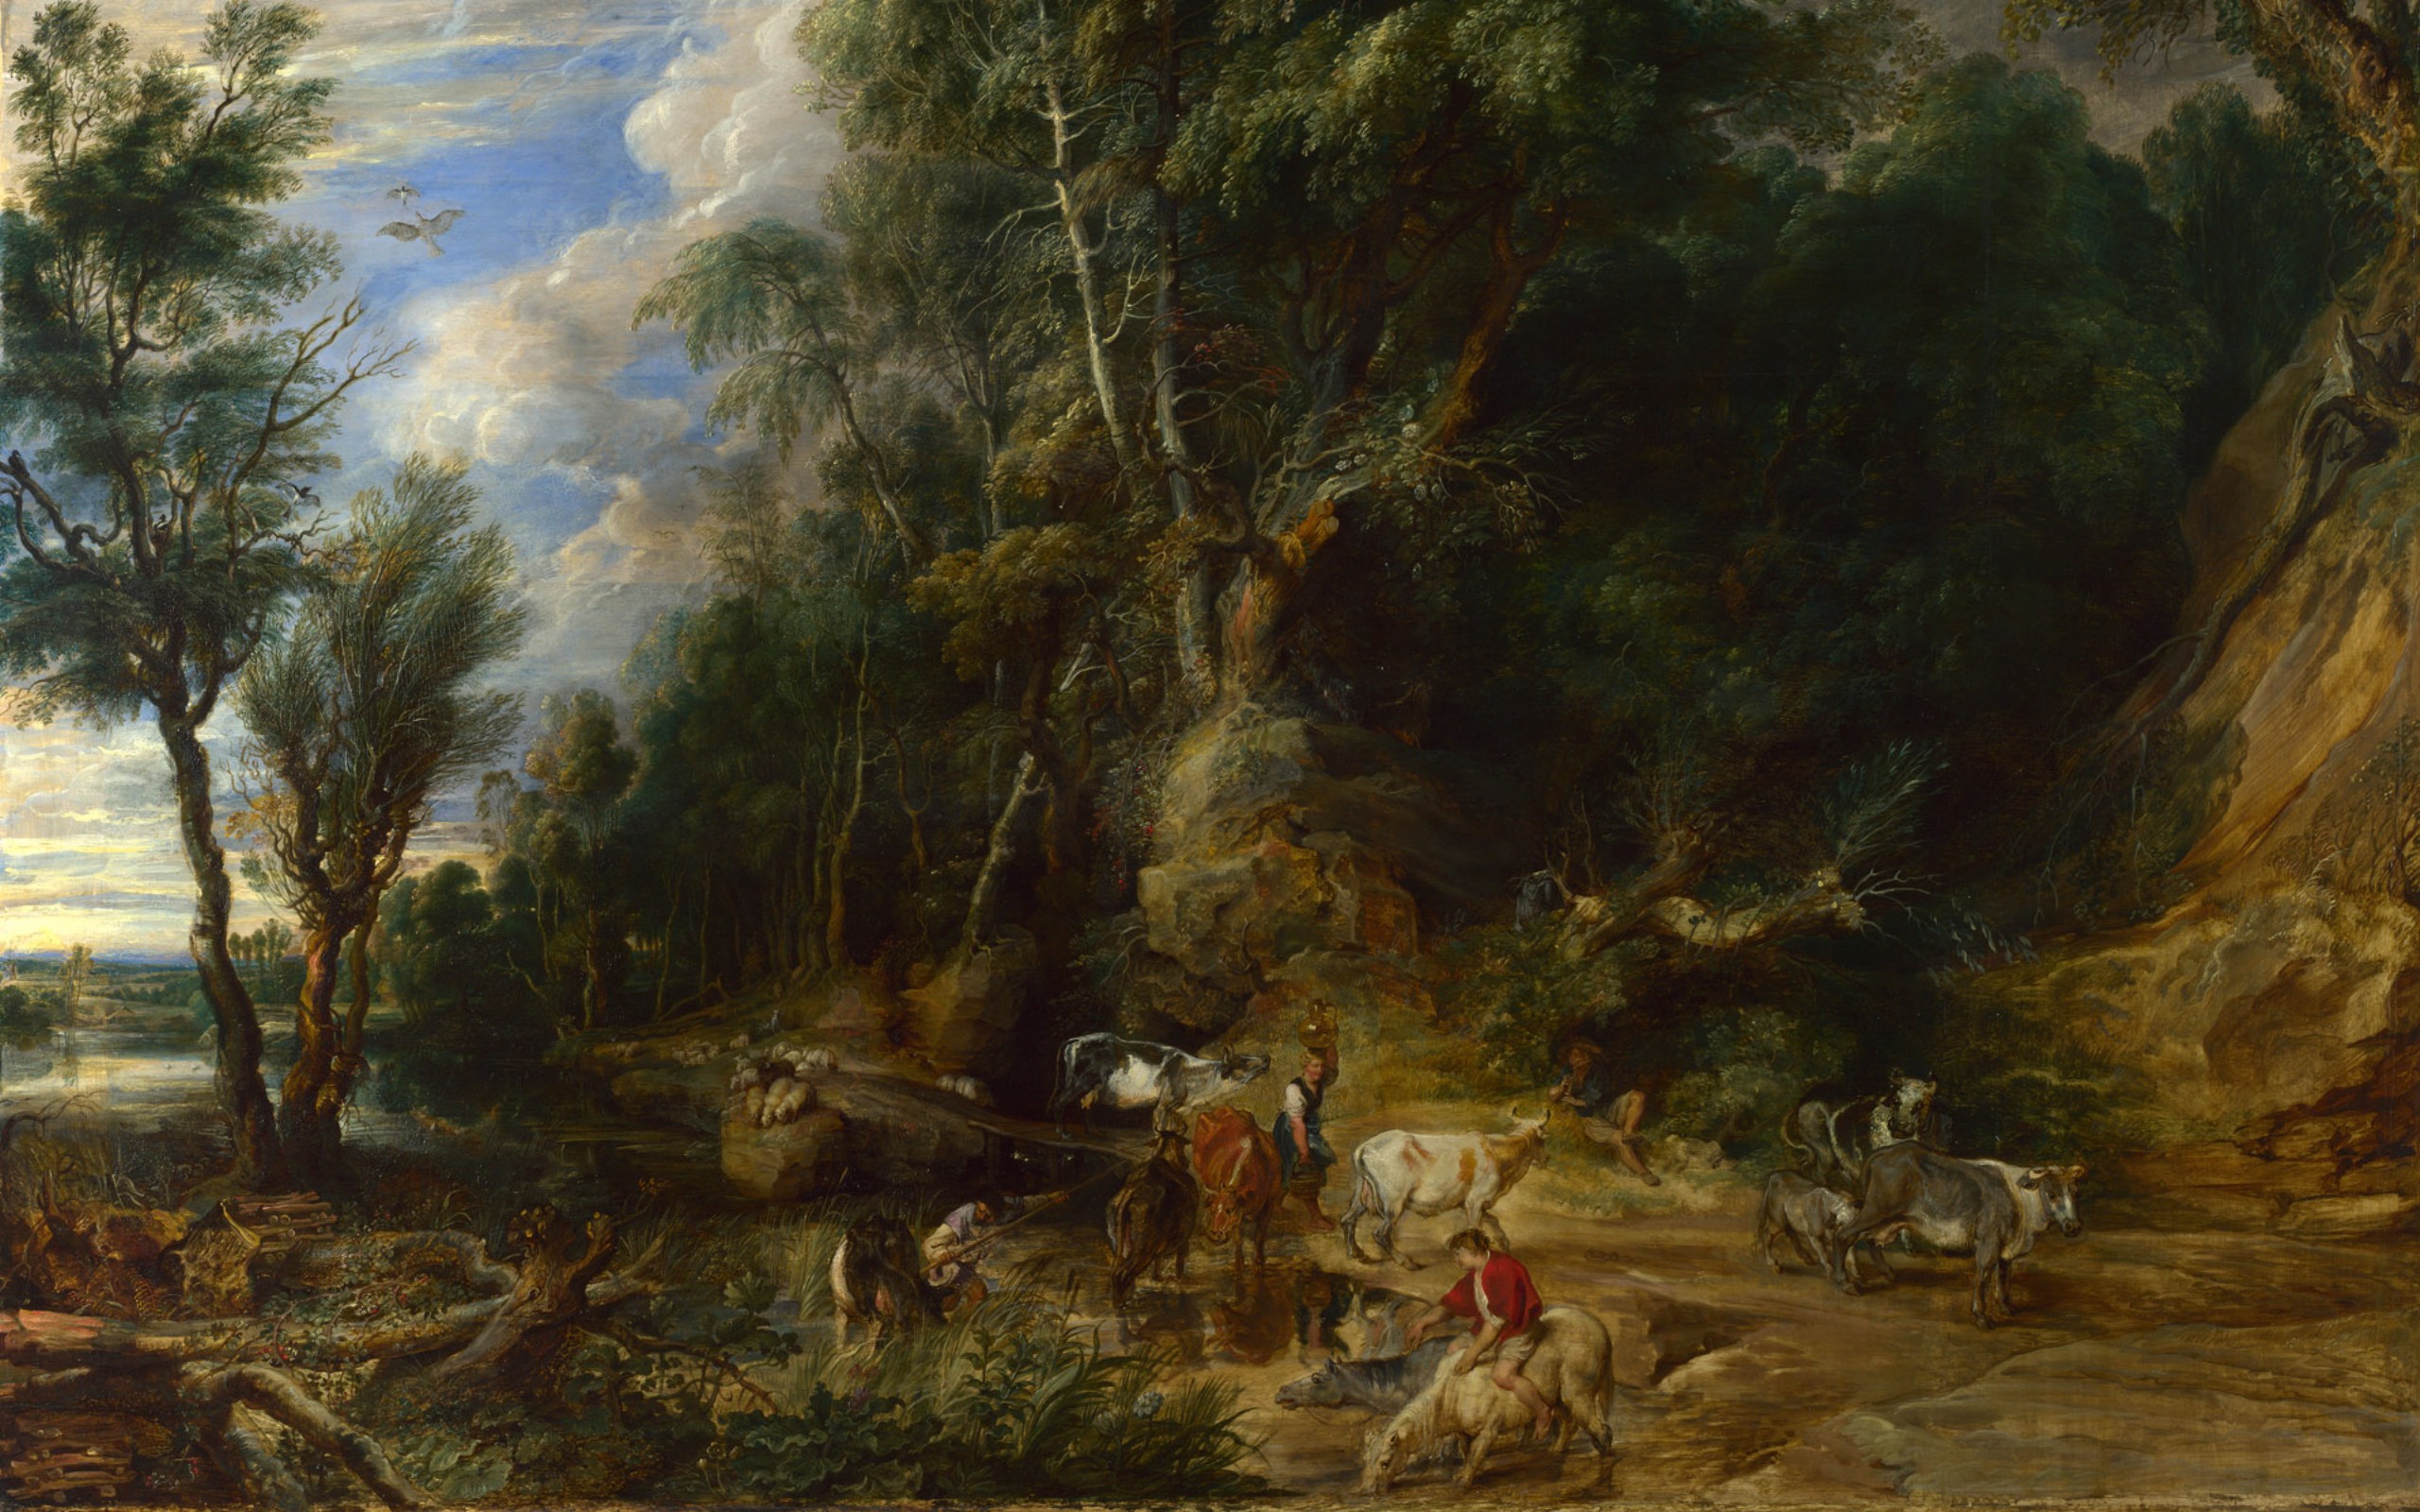 World Famous Paintings Episode Widescreen 5 09 Wallpaper - Peter Paul Rubens The Watering Place - HD Wallpaper 